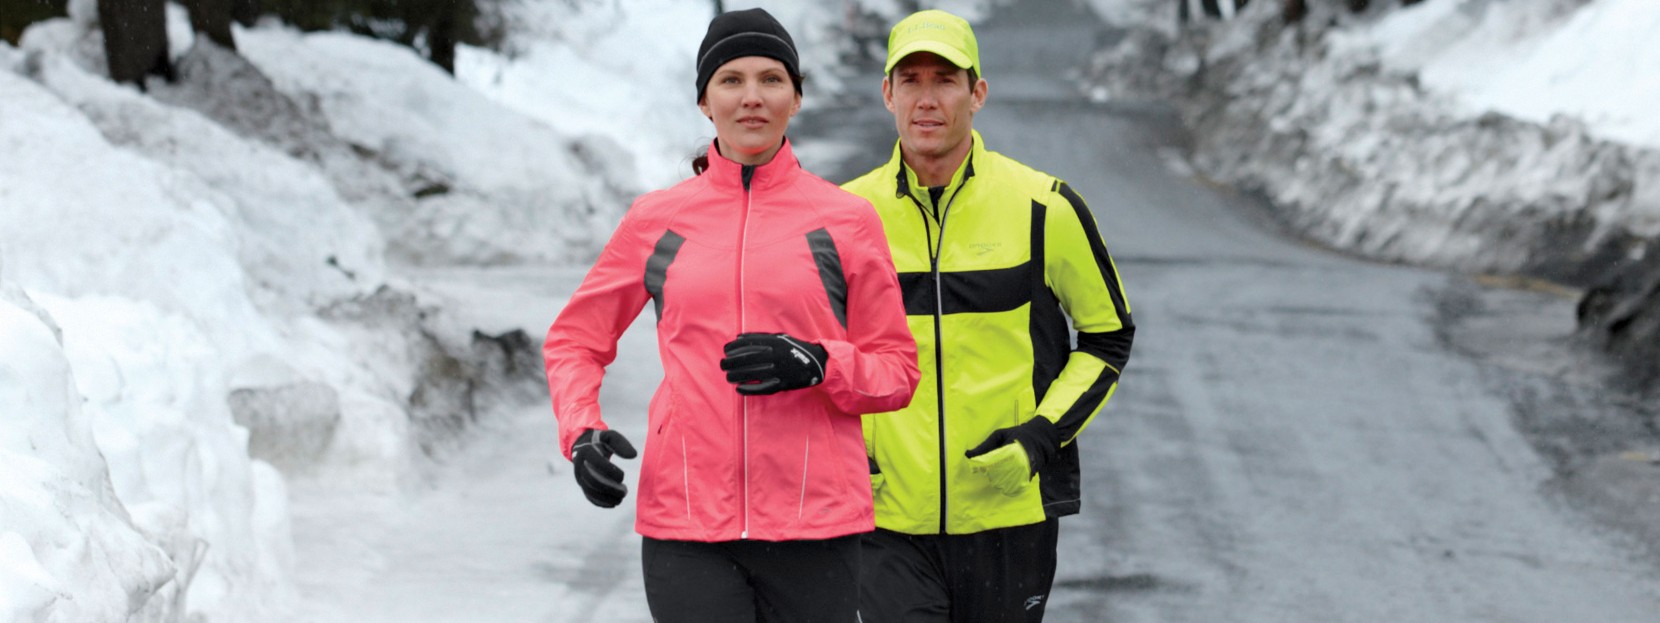 A man and a woman running on a snow covered road